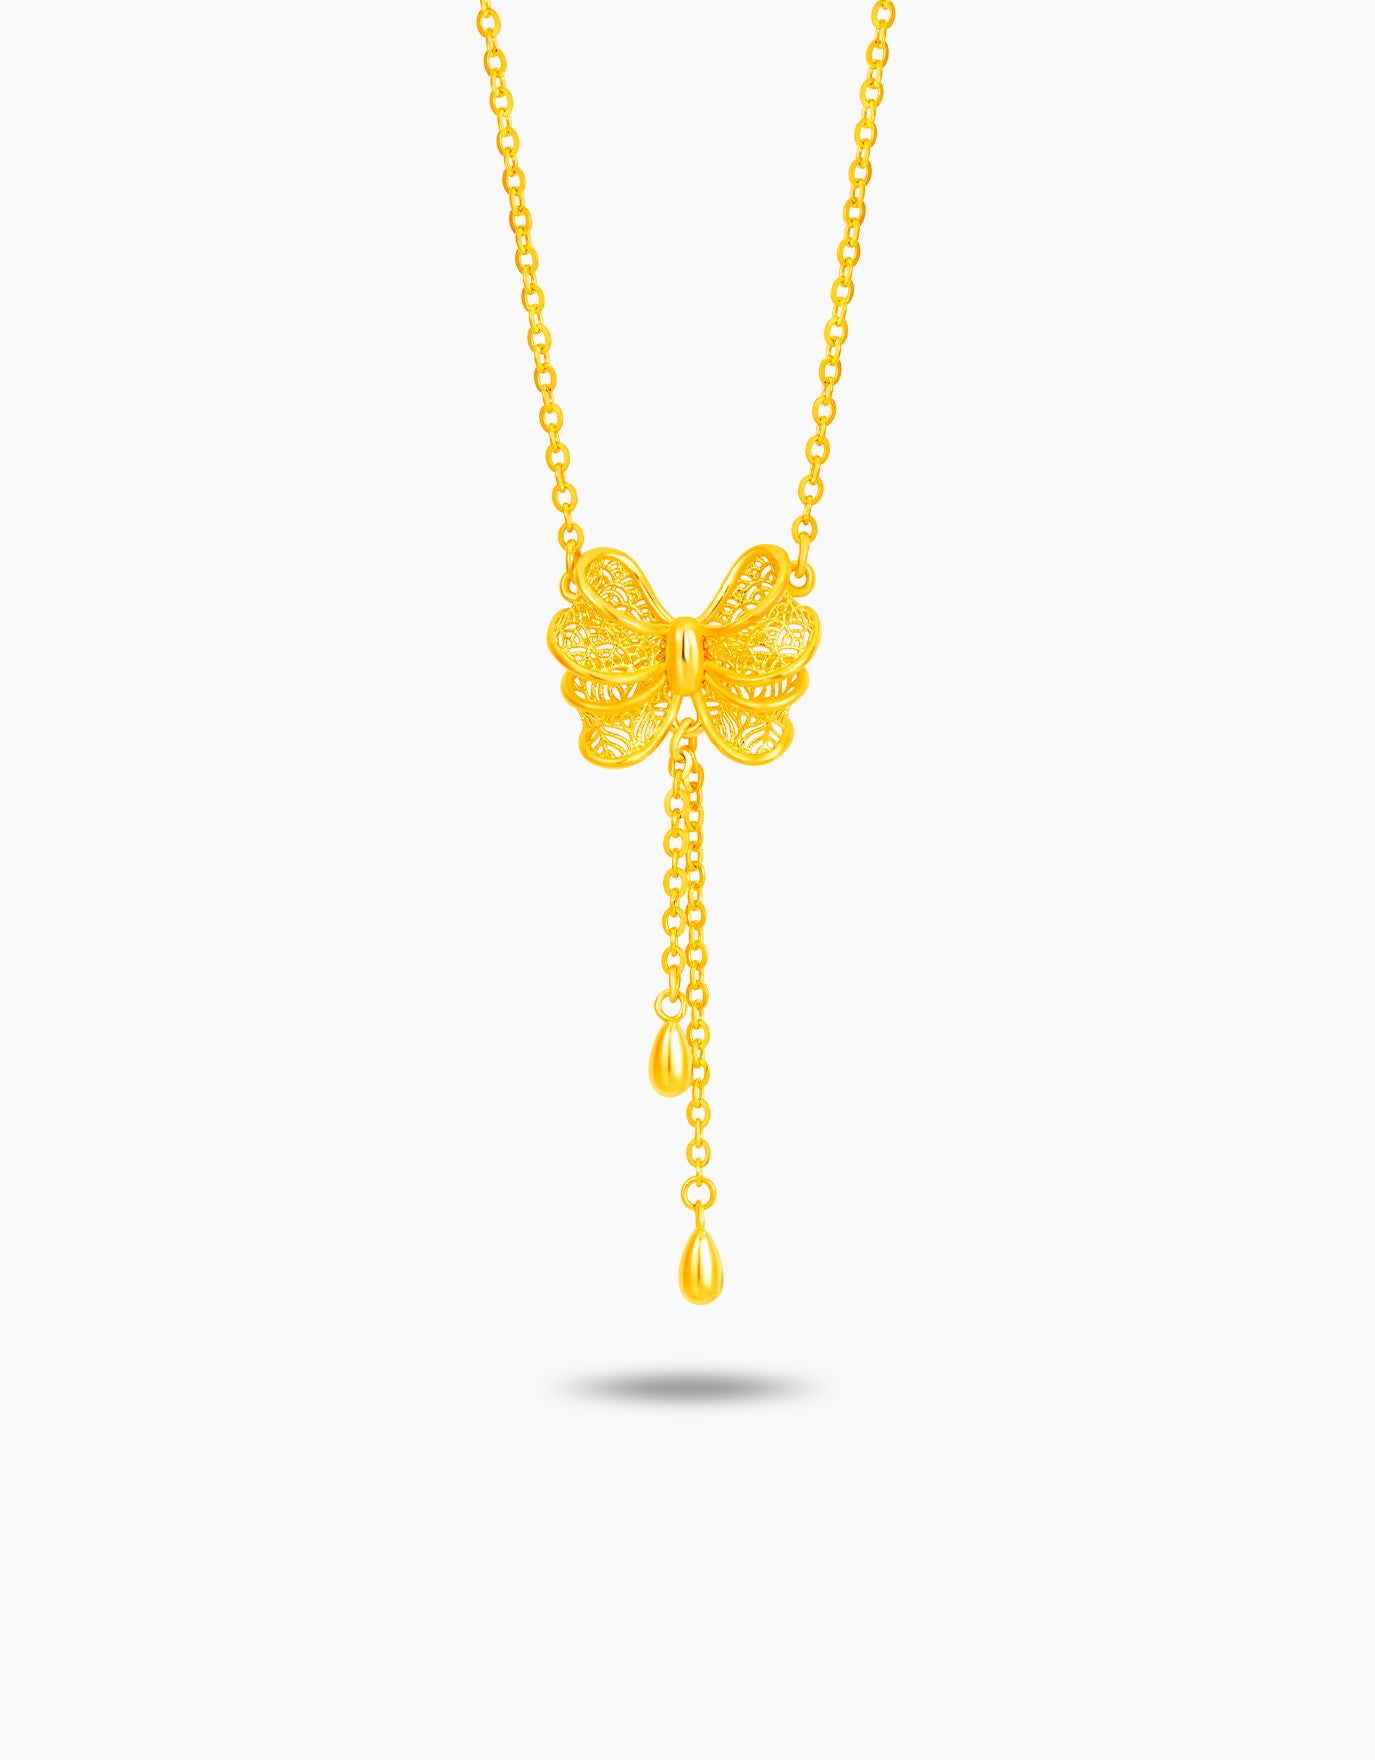 LVC 9IN Delicate Bow 999 Gold Necklace